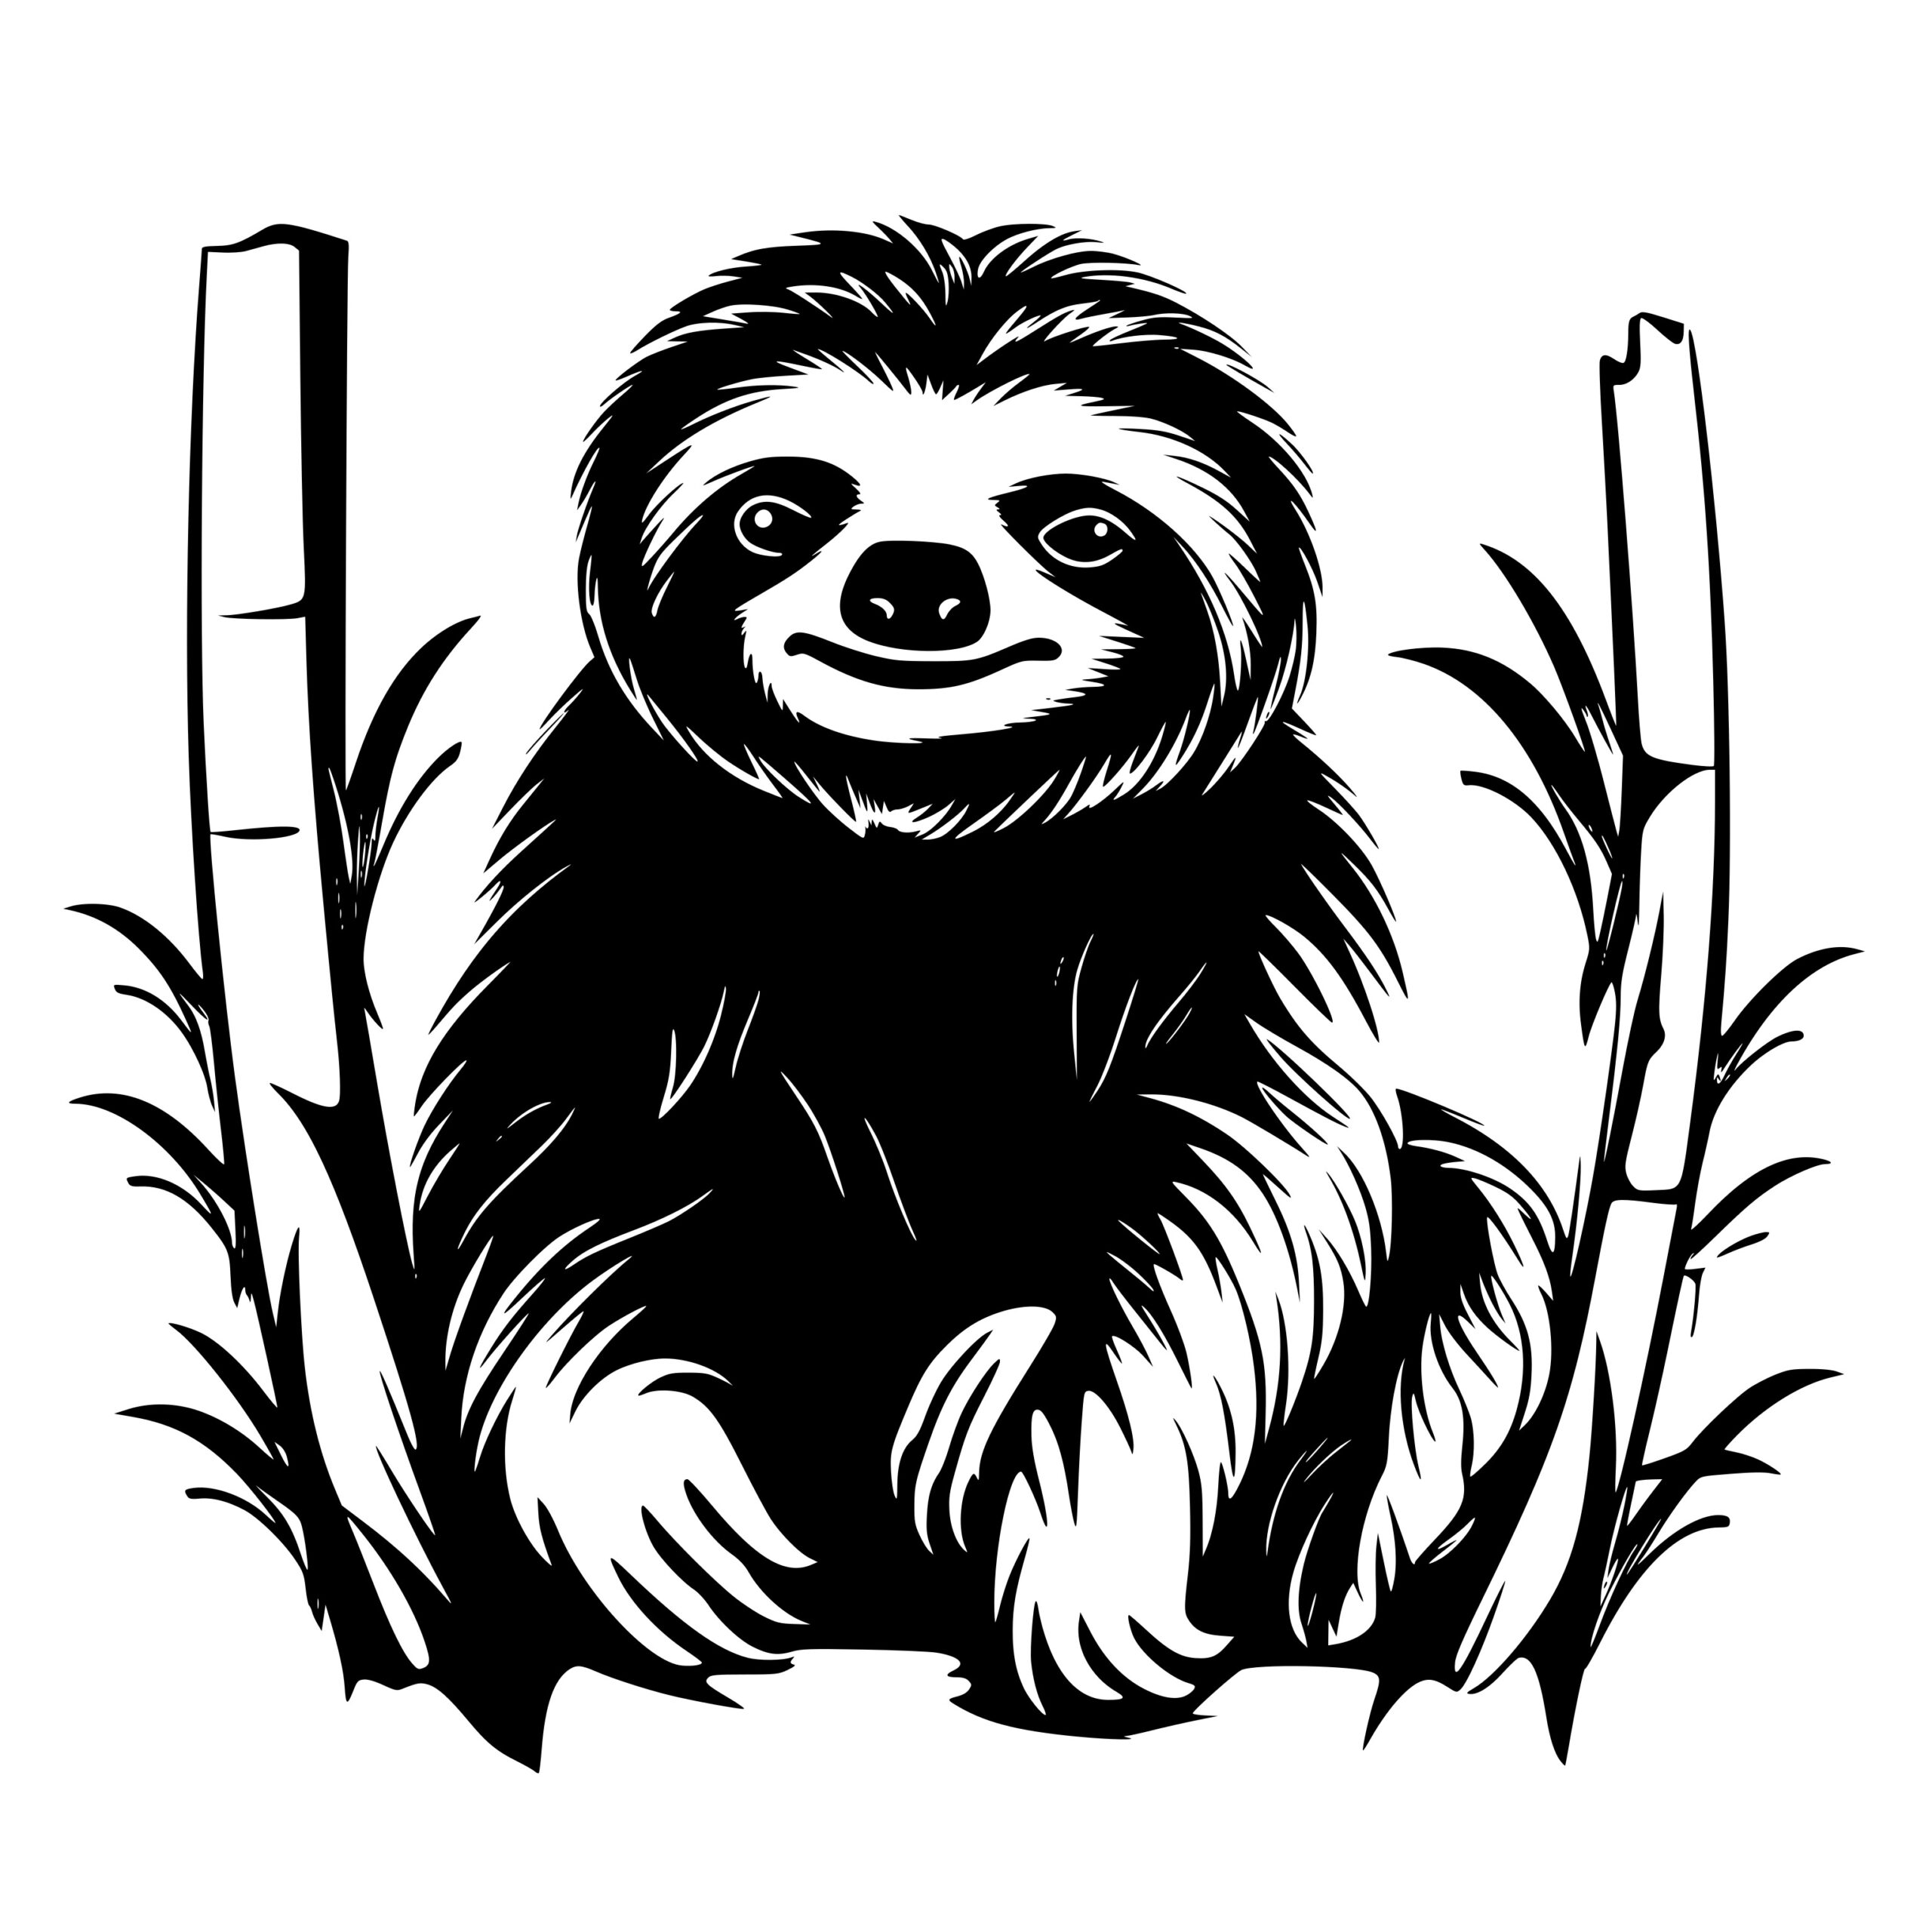 Sloth in Nature - SVG File for Cricut, Silhouette, Laser Machines